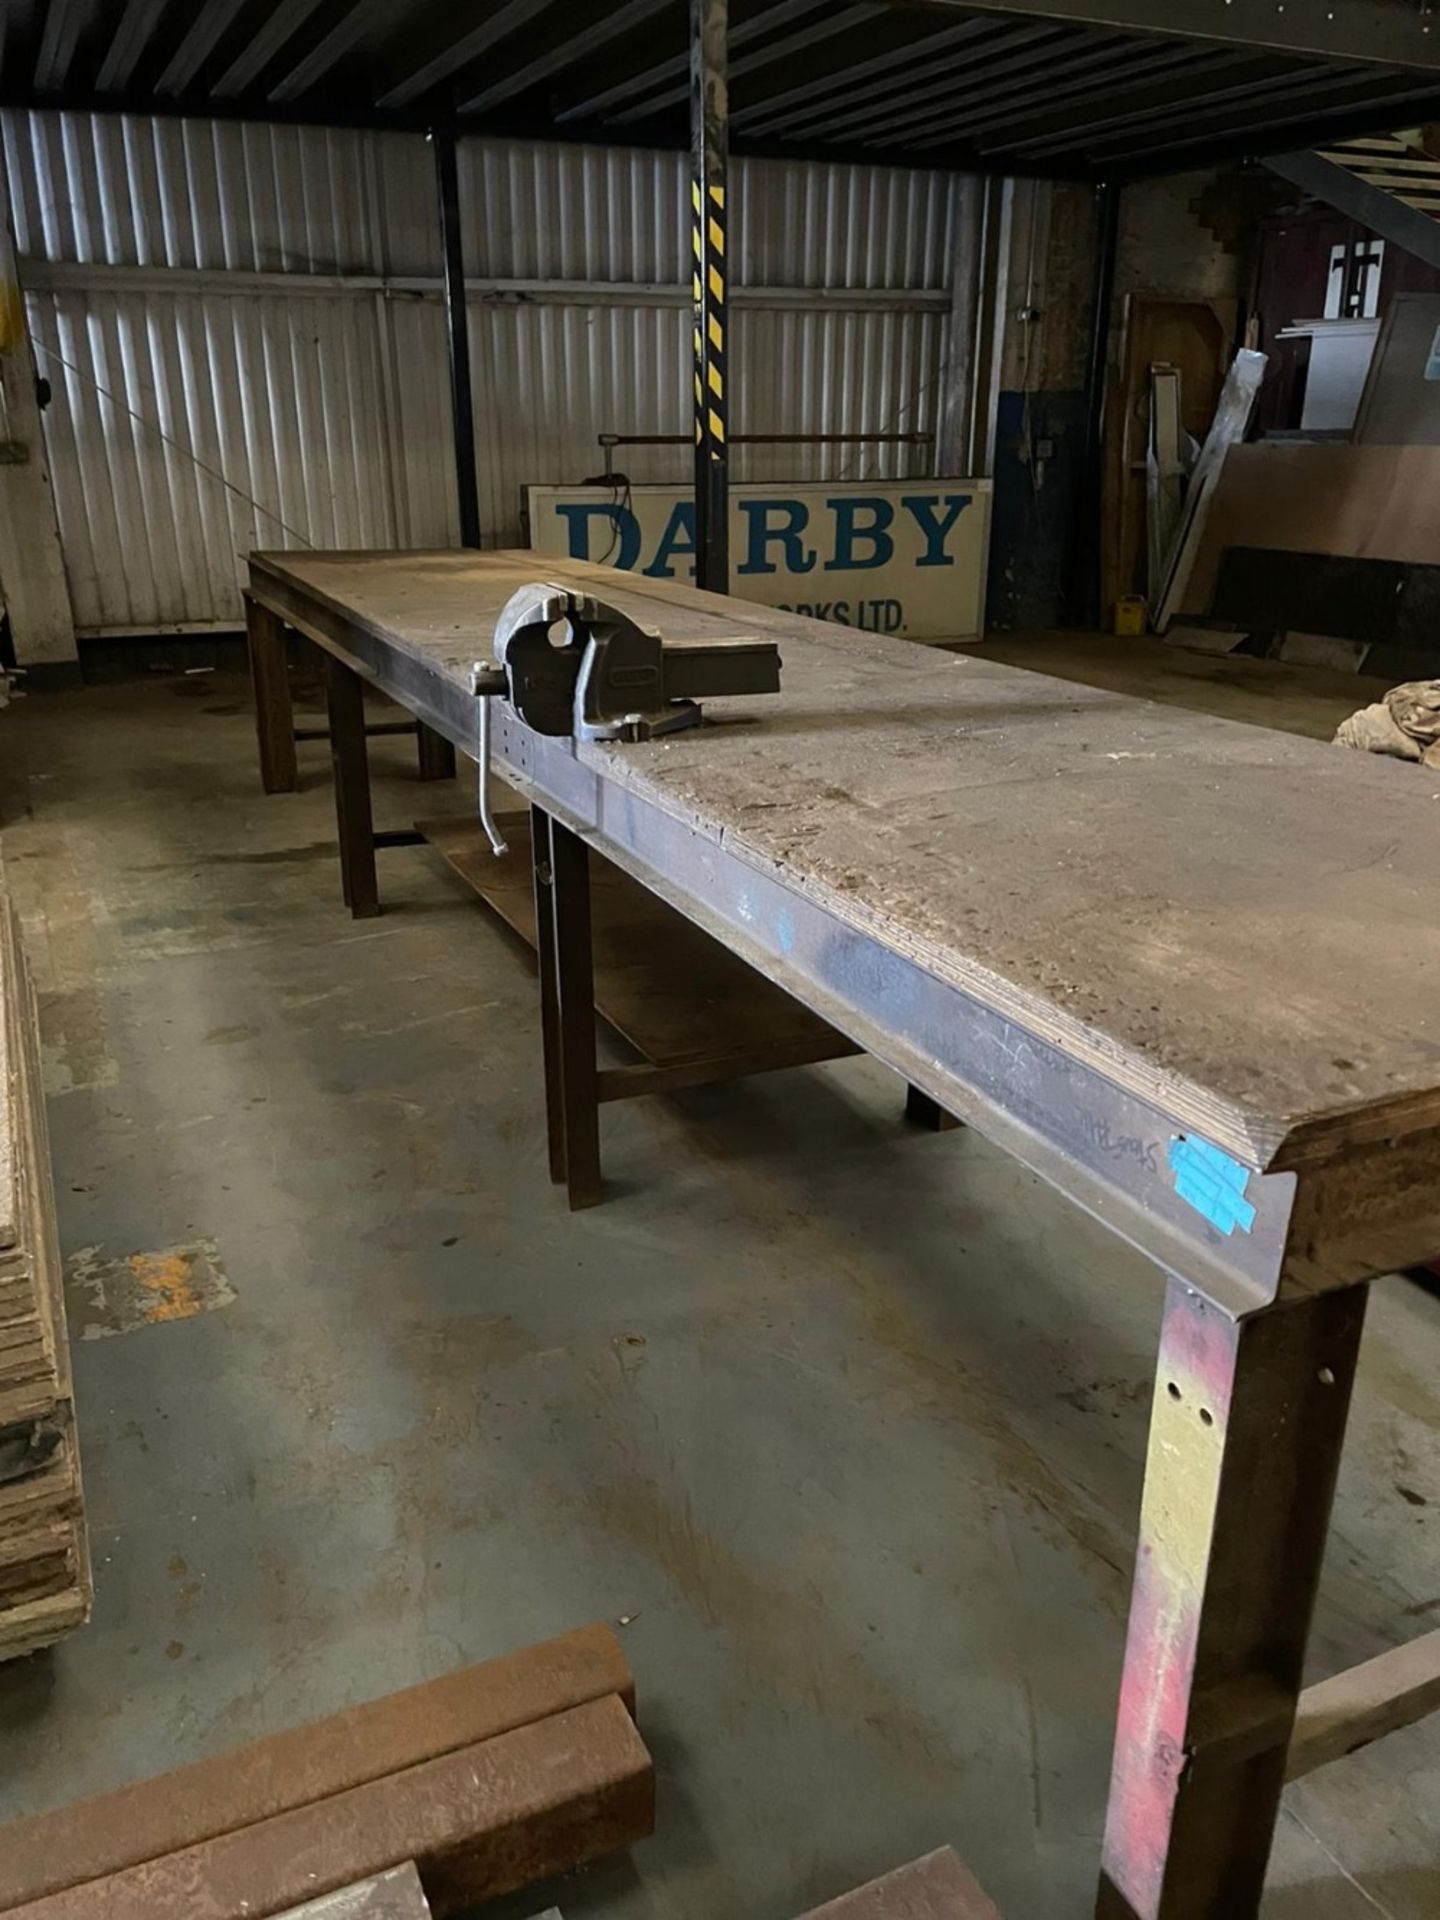 EXTRA LONG HEAVY DUTY WORKBENCH, 17FT X 3FT6" APPROX. LOT LOCATION: EMERALD HOUSE, SWINBORNE ROAD, - Image 2 of 3